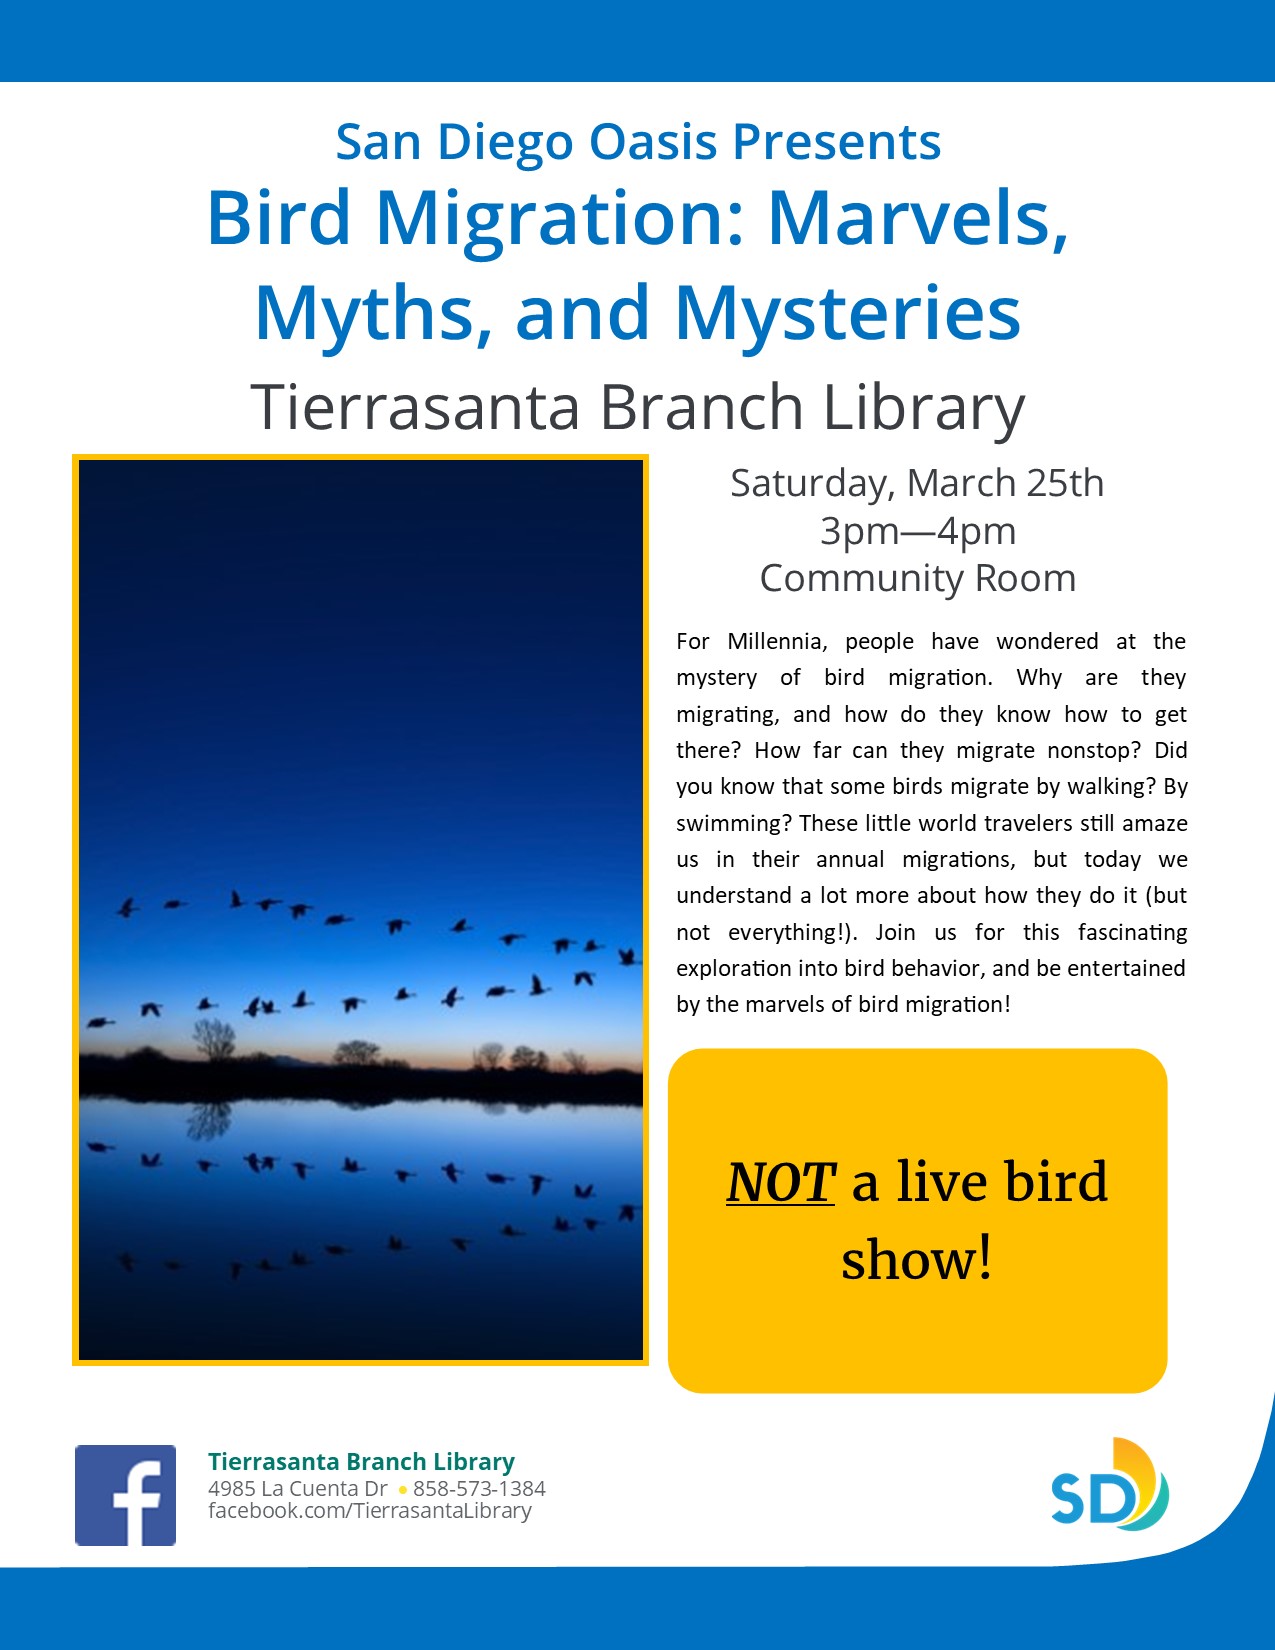 Flyer with the image of birds in flight during sunrise/set over a lake